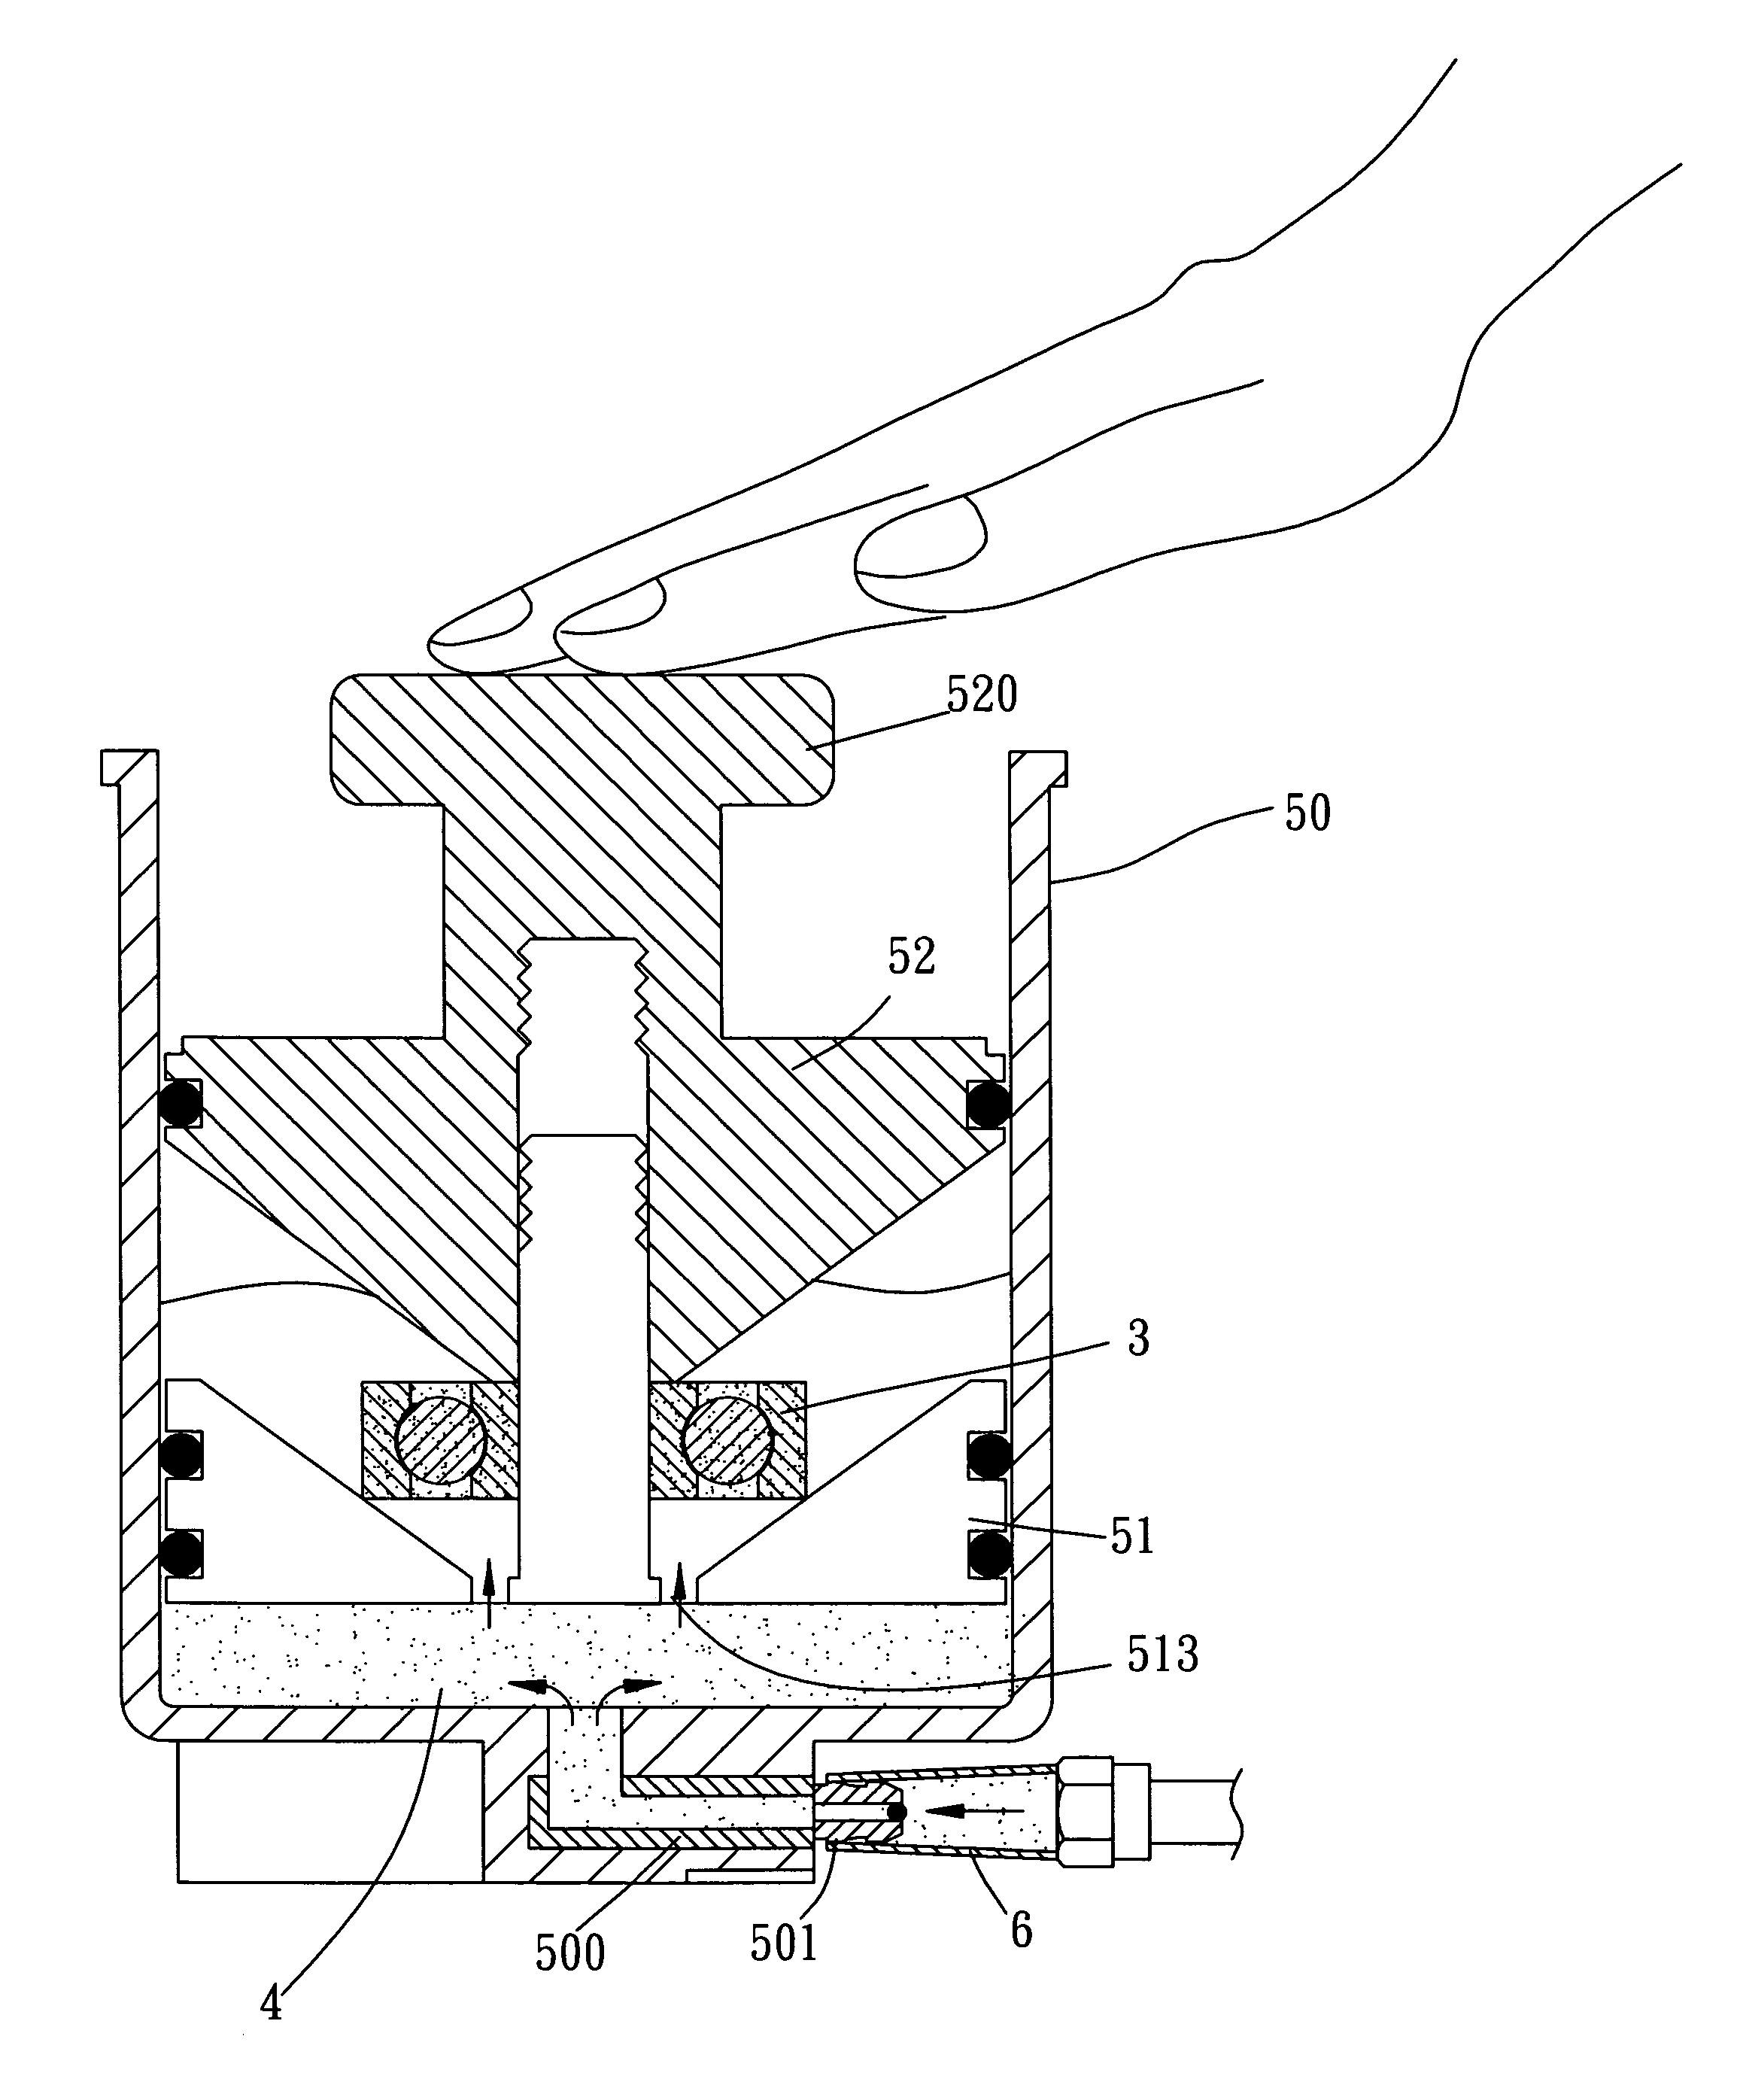 Lubrication device for bearings and other mechanical parts